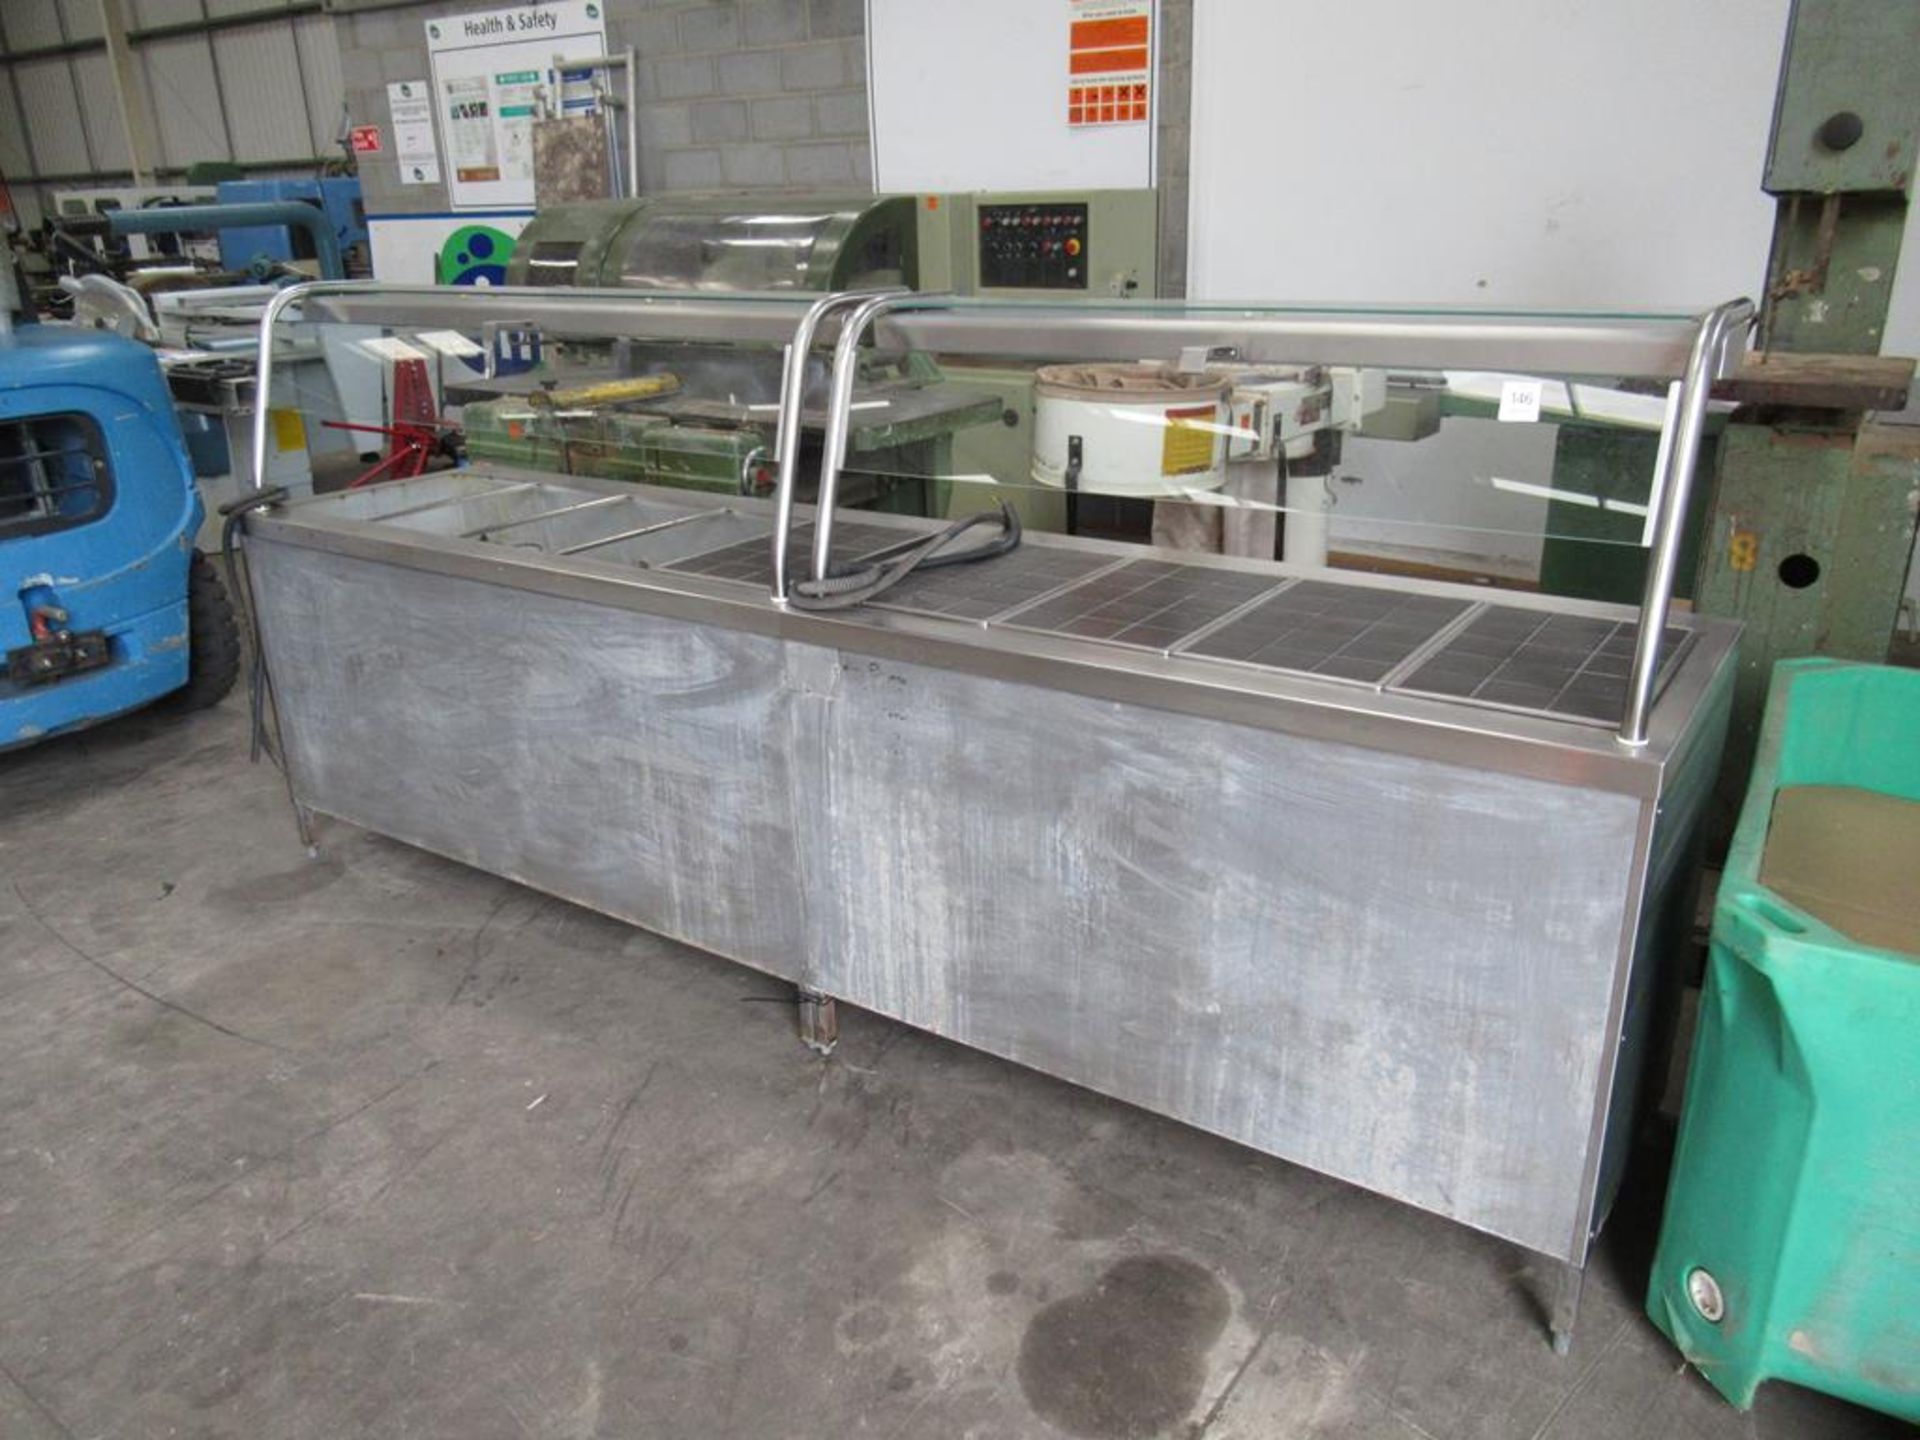 A large stainless steel servery